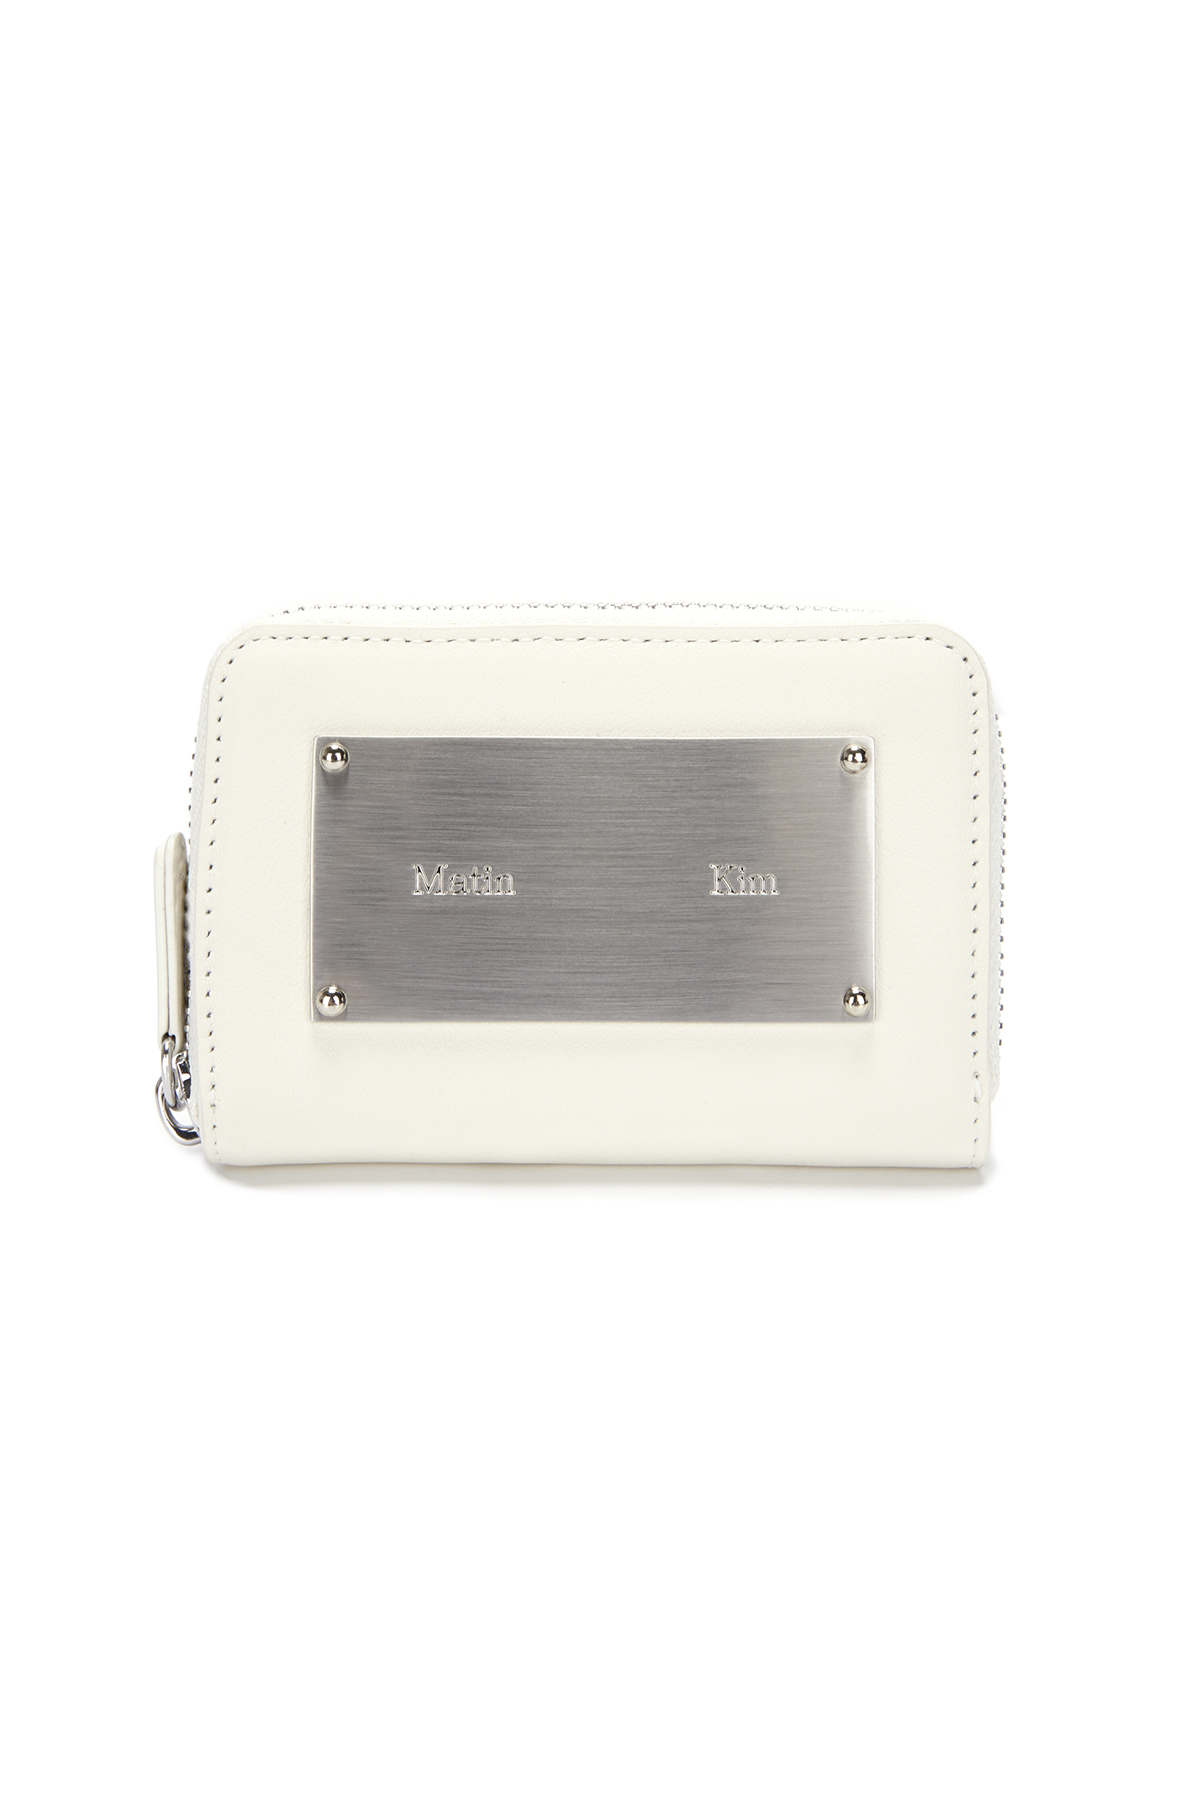 VINTAGE COMPACT WALLET IN IVORY